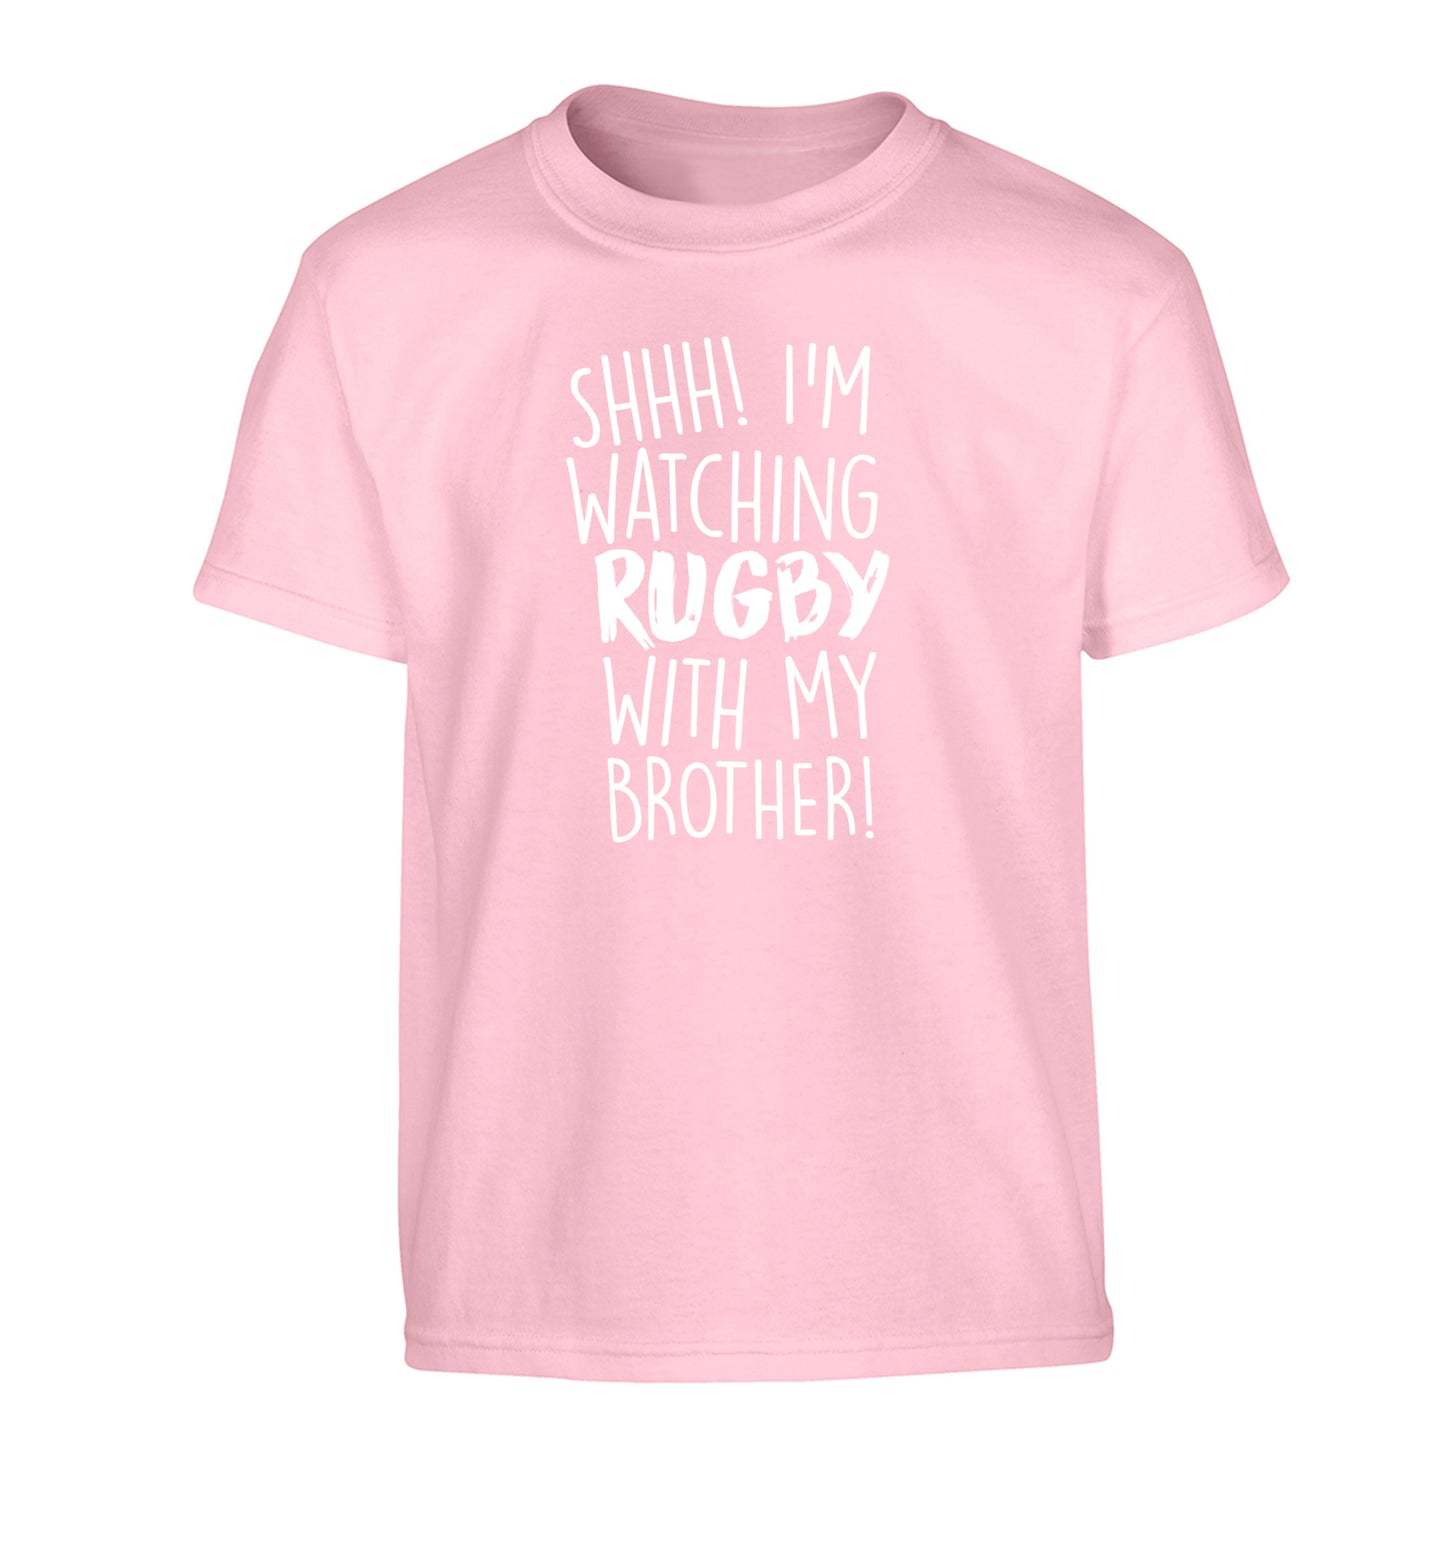 Shh... I'm watching rugby with my brother Children's light pink Tshirt 12-13 Years